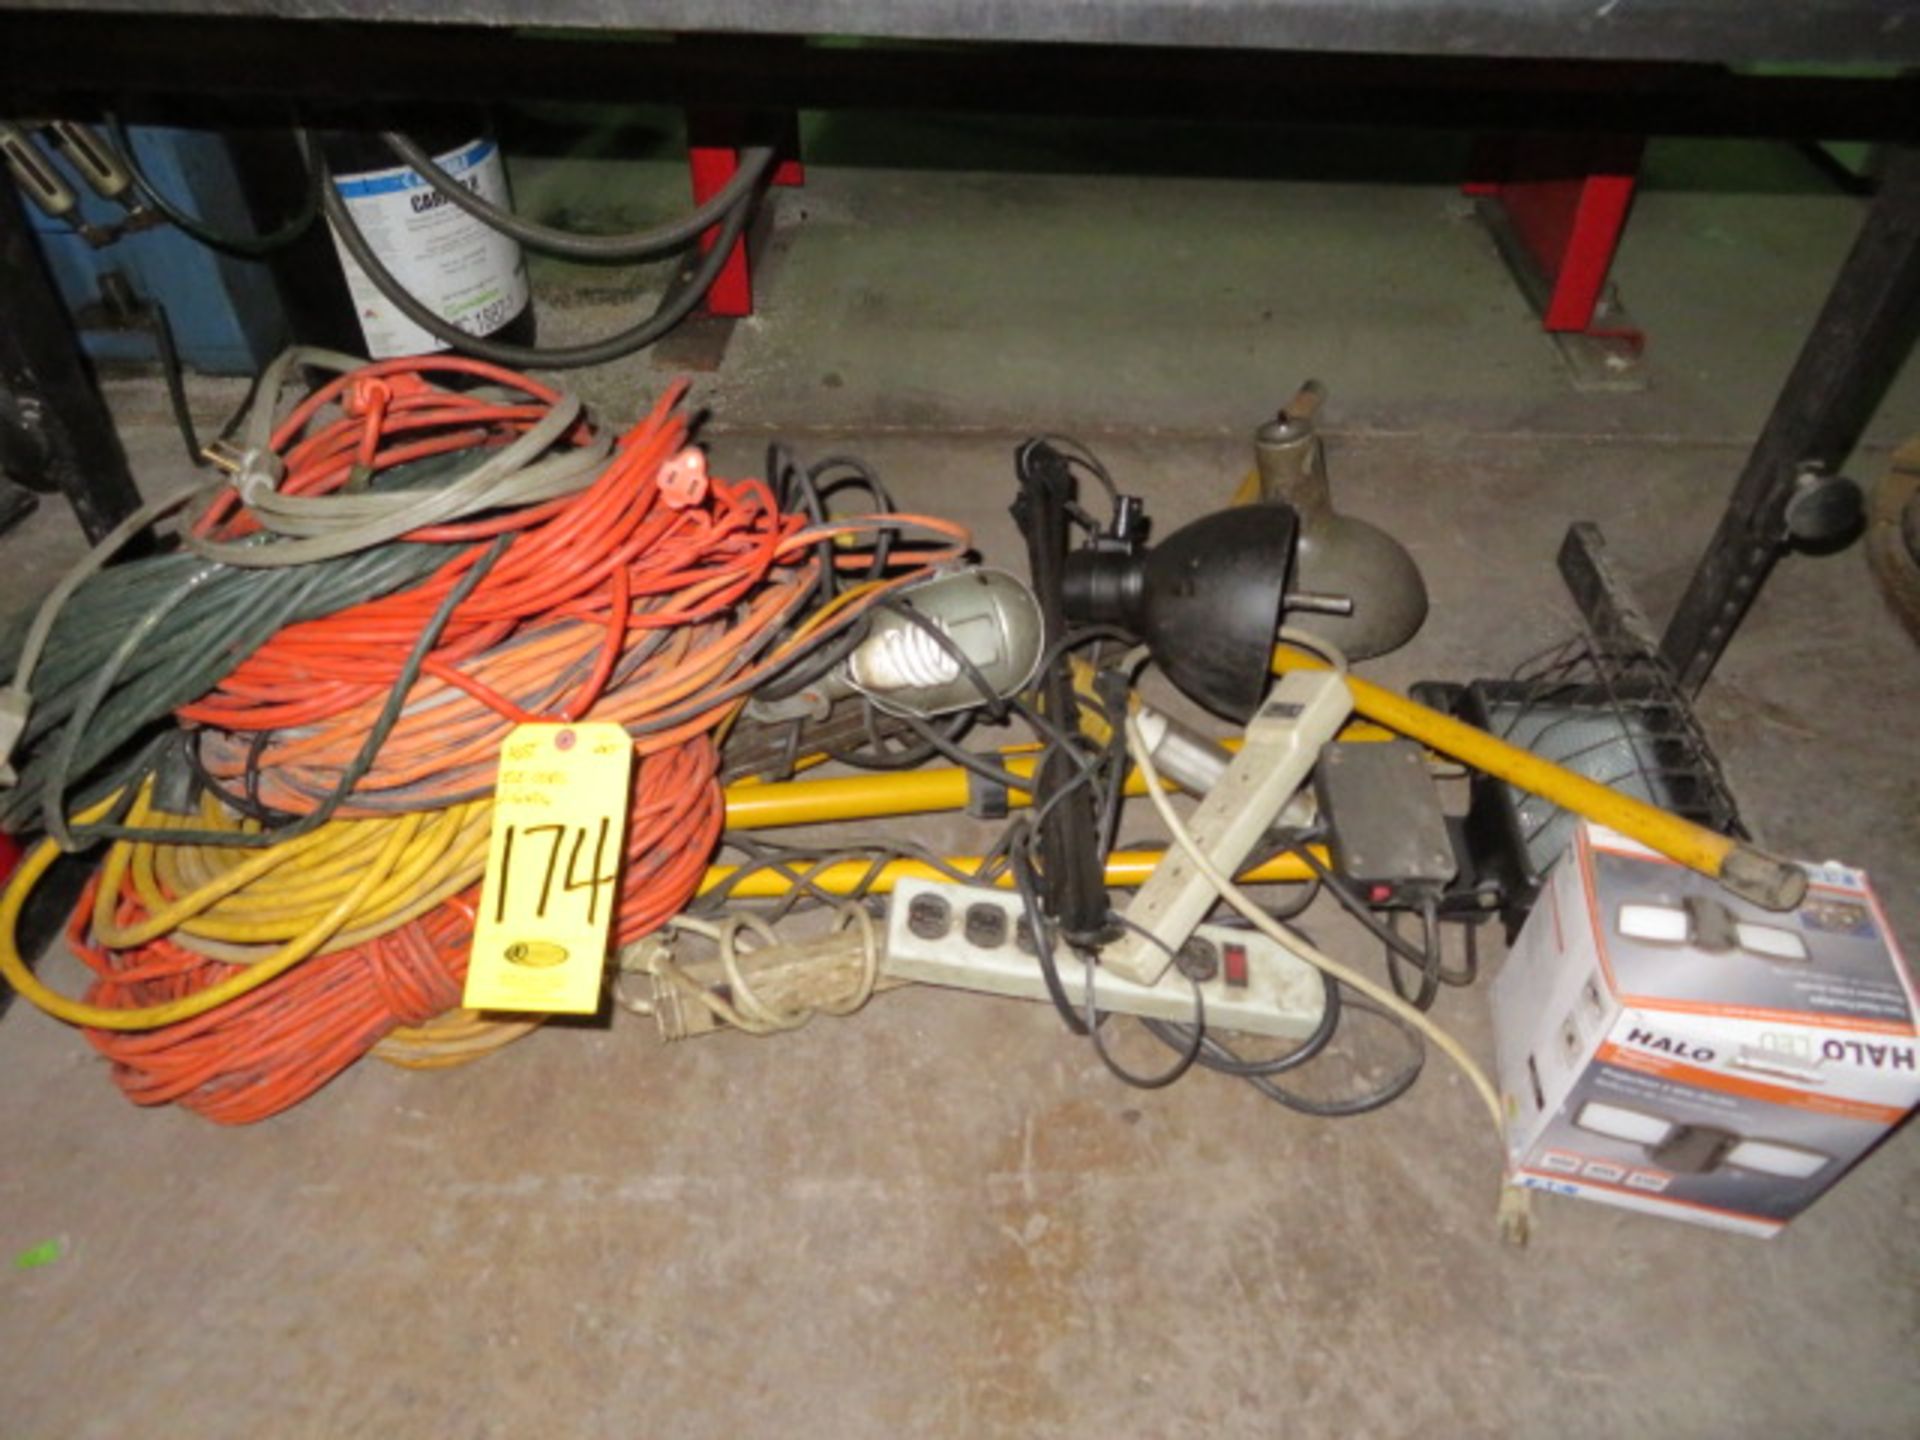 ASSORTED ELECTRICAL EXTENSION CORDS, POWER STRIPS AND LIGHTING